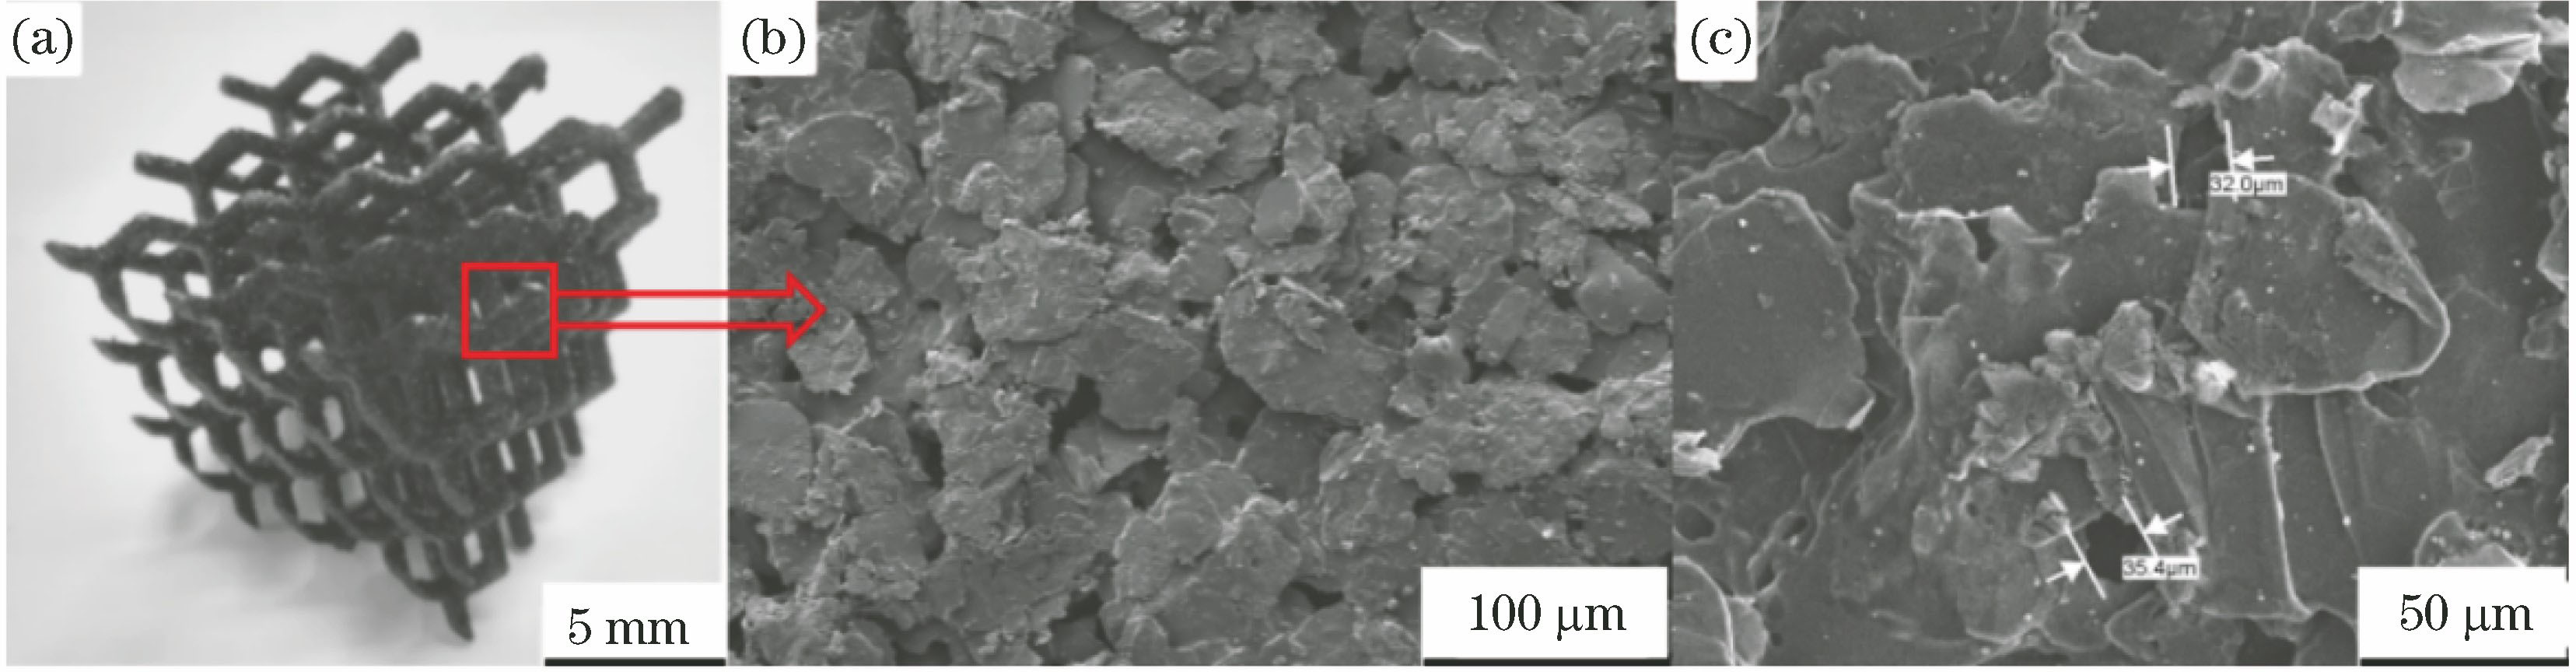 Porous graphite preform and its surface SEM image. (a) Image of preform; (b) SEM image magnified by 60 times; (c) SEM image magnified by 600 times